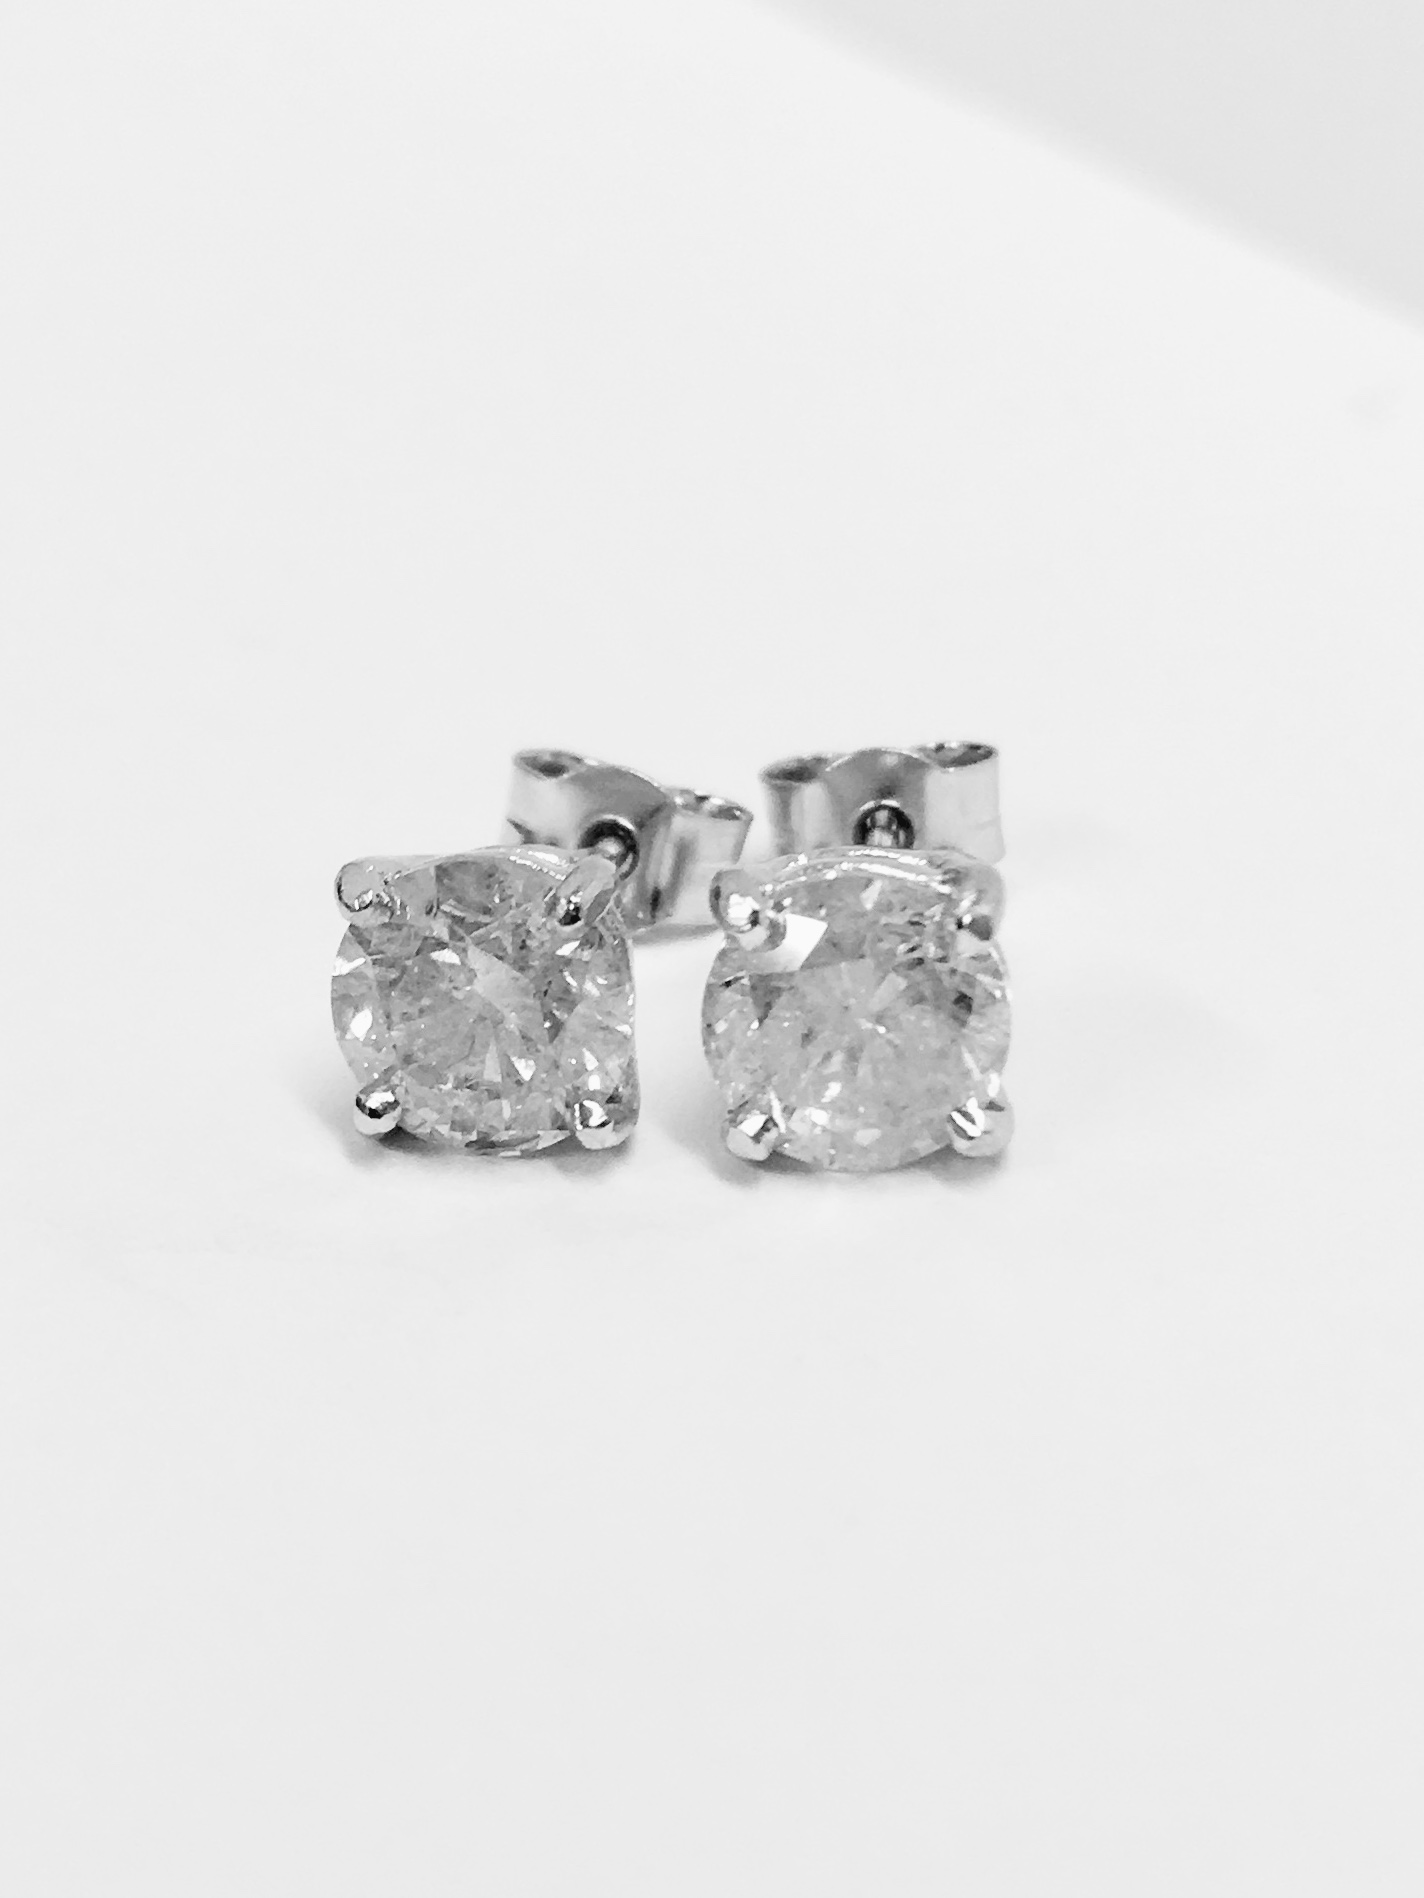 1ct diamond solitaire earrings - Image 6 of 24